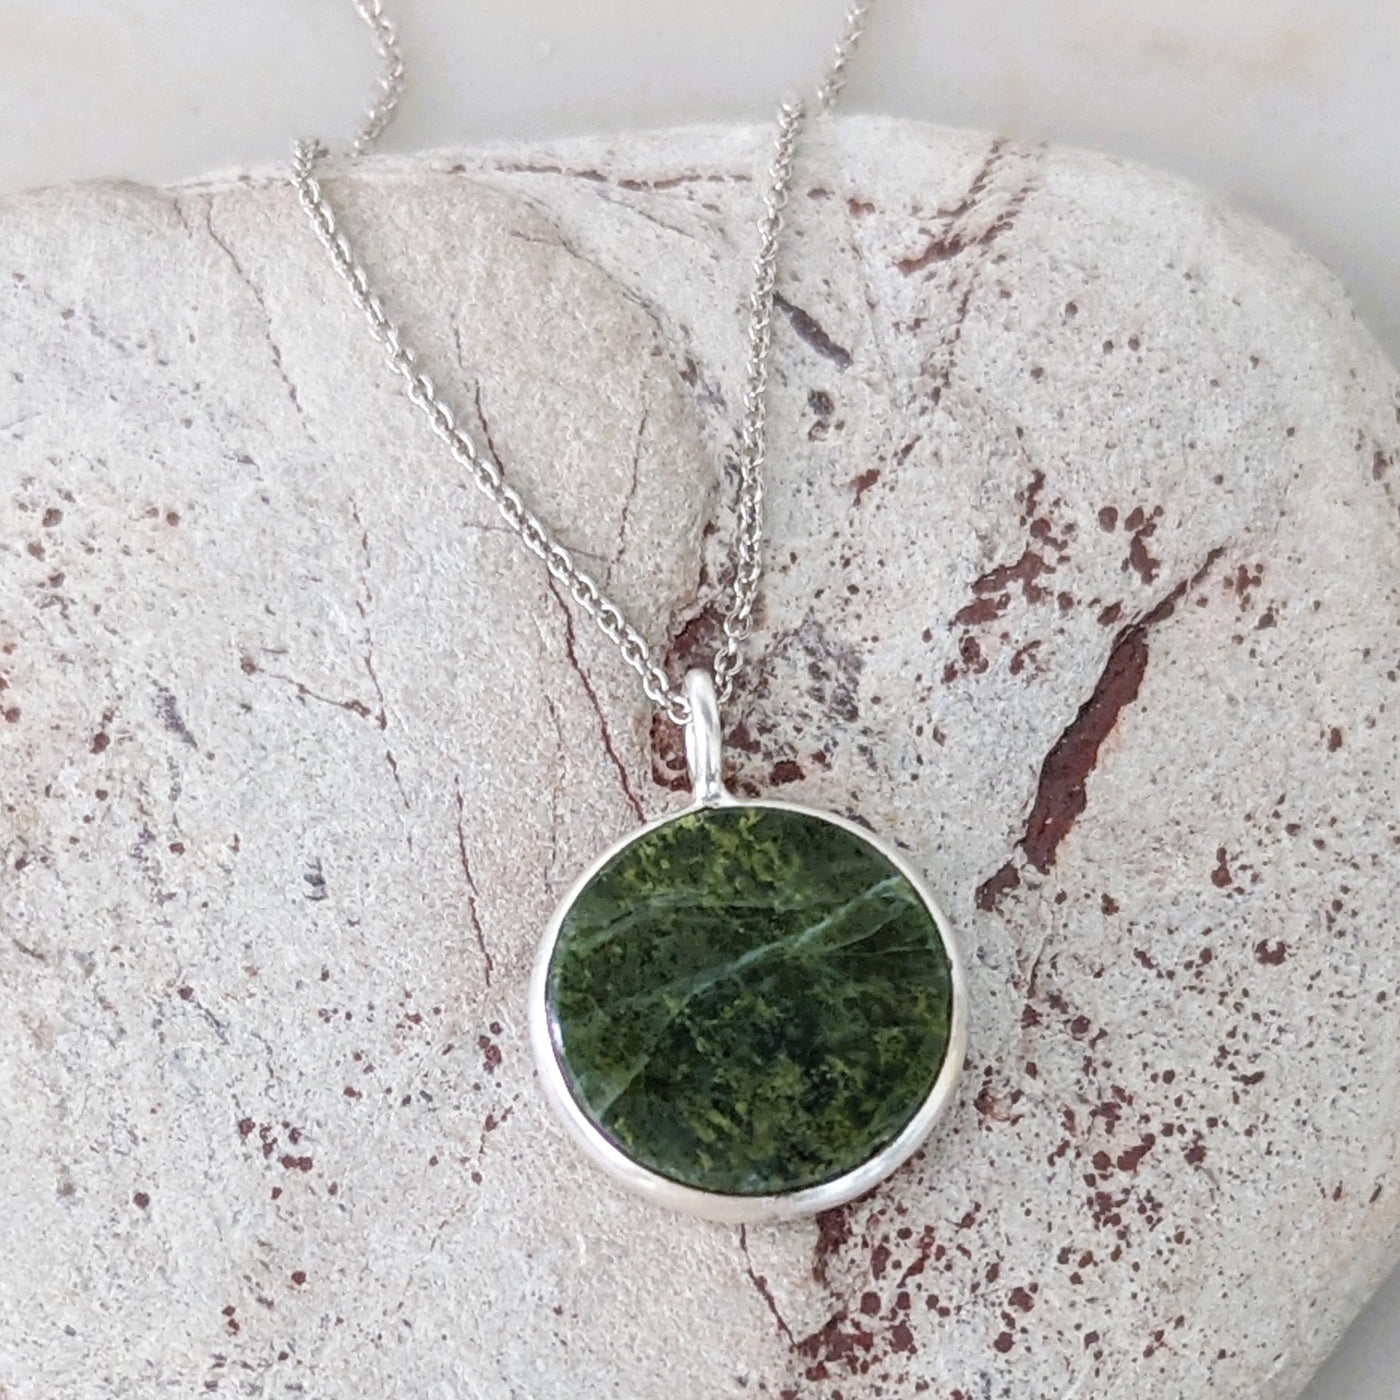 sterling silver peridot August birthstone necklace